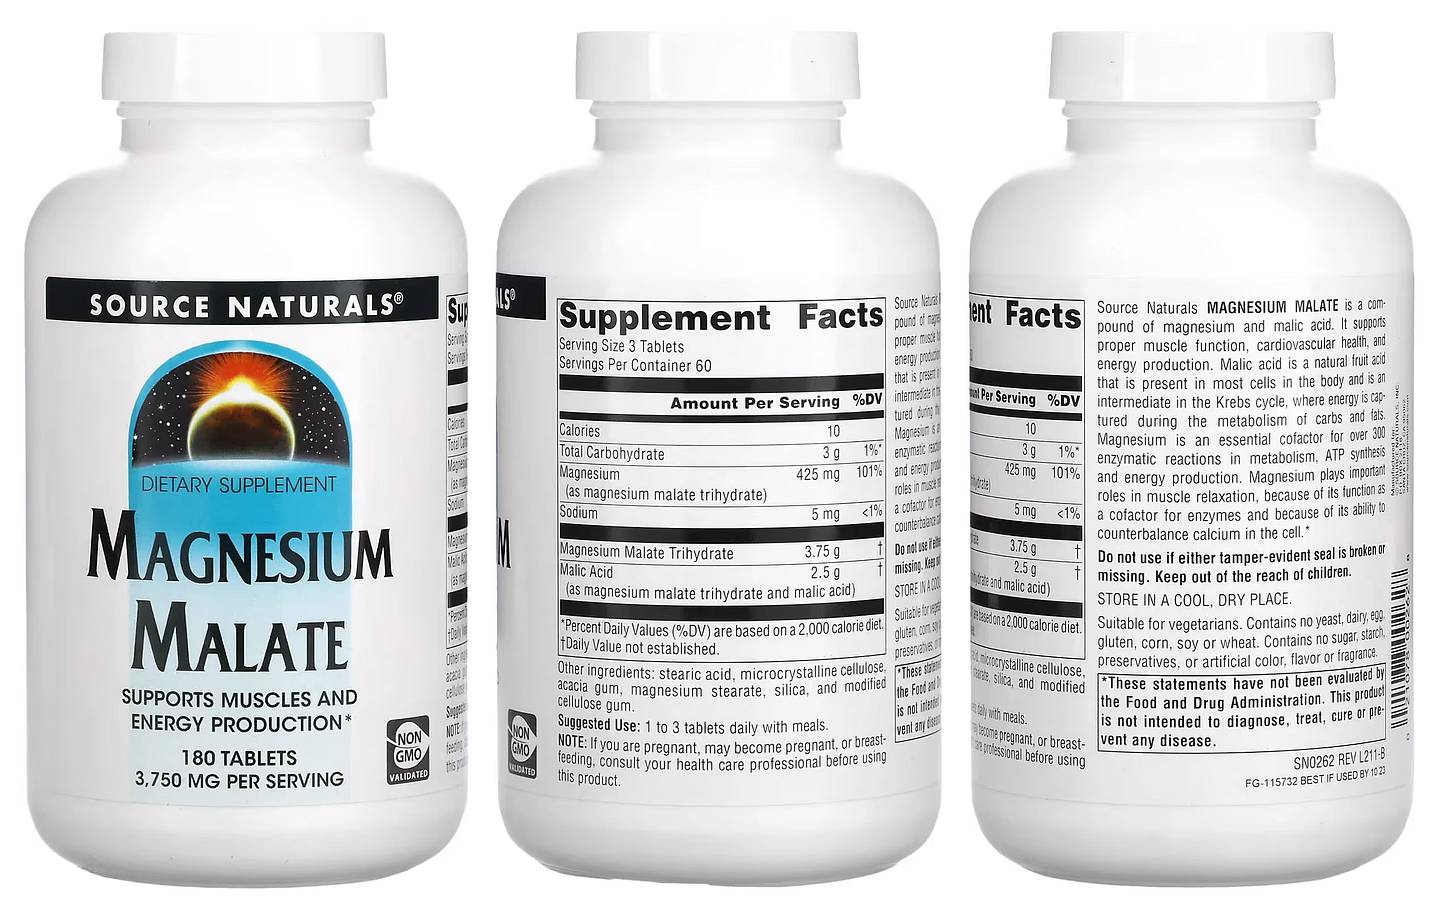 Source Naturals, Magnesium Malate packaging